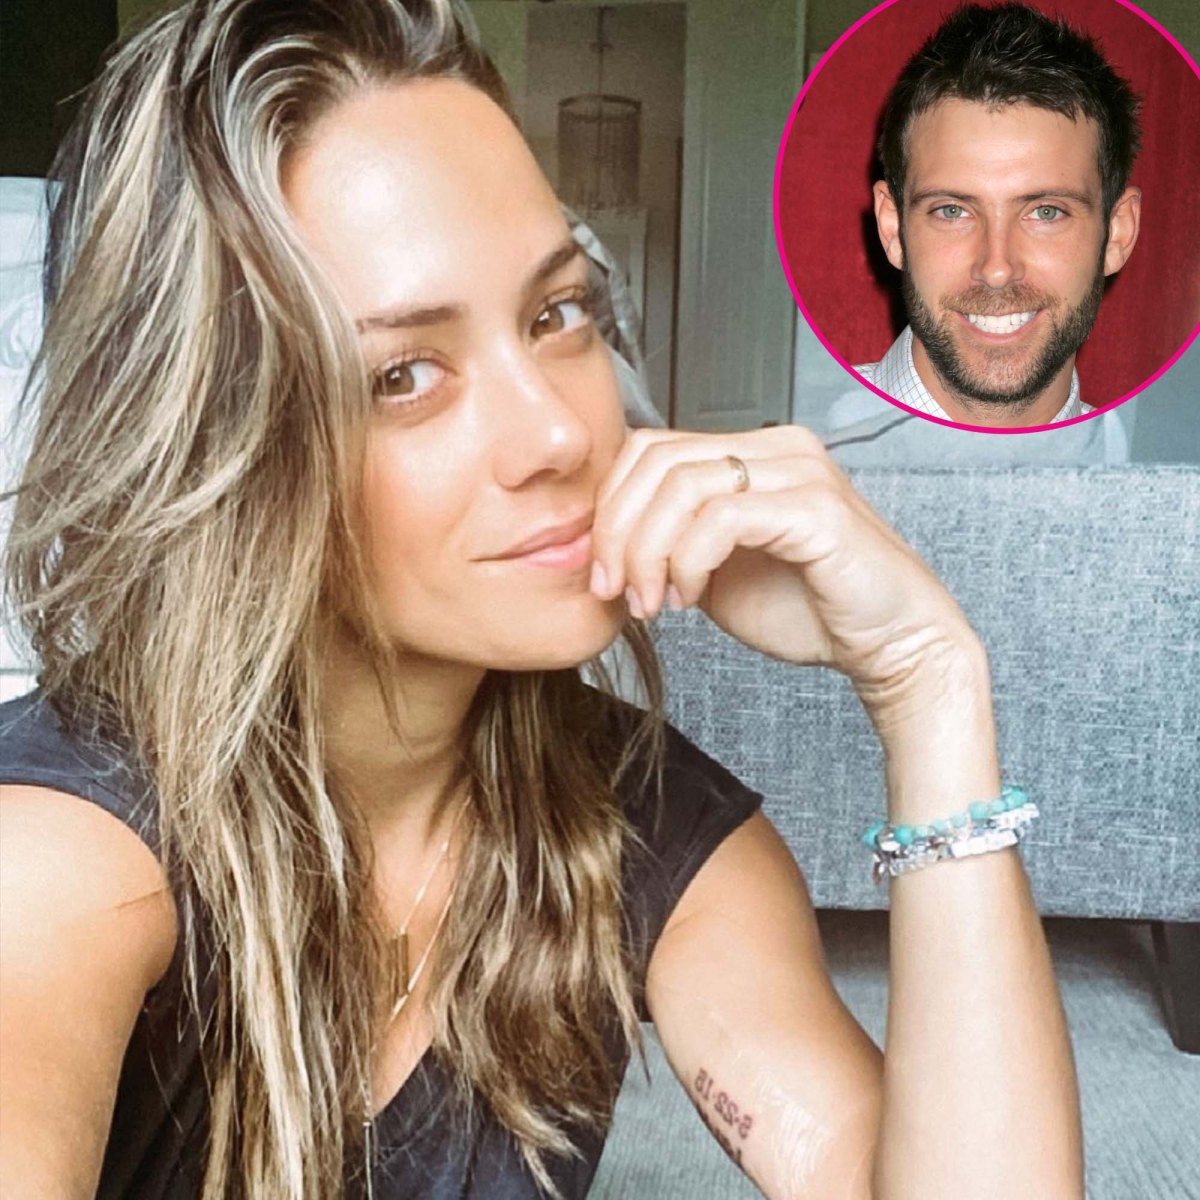 Jana Kramer Is 'Open' to Being More Than Friends With Graham Bunn